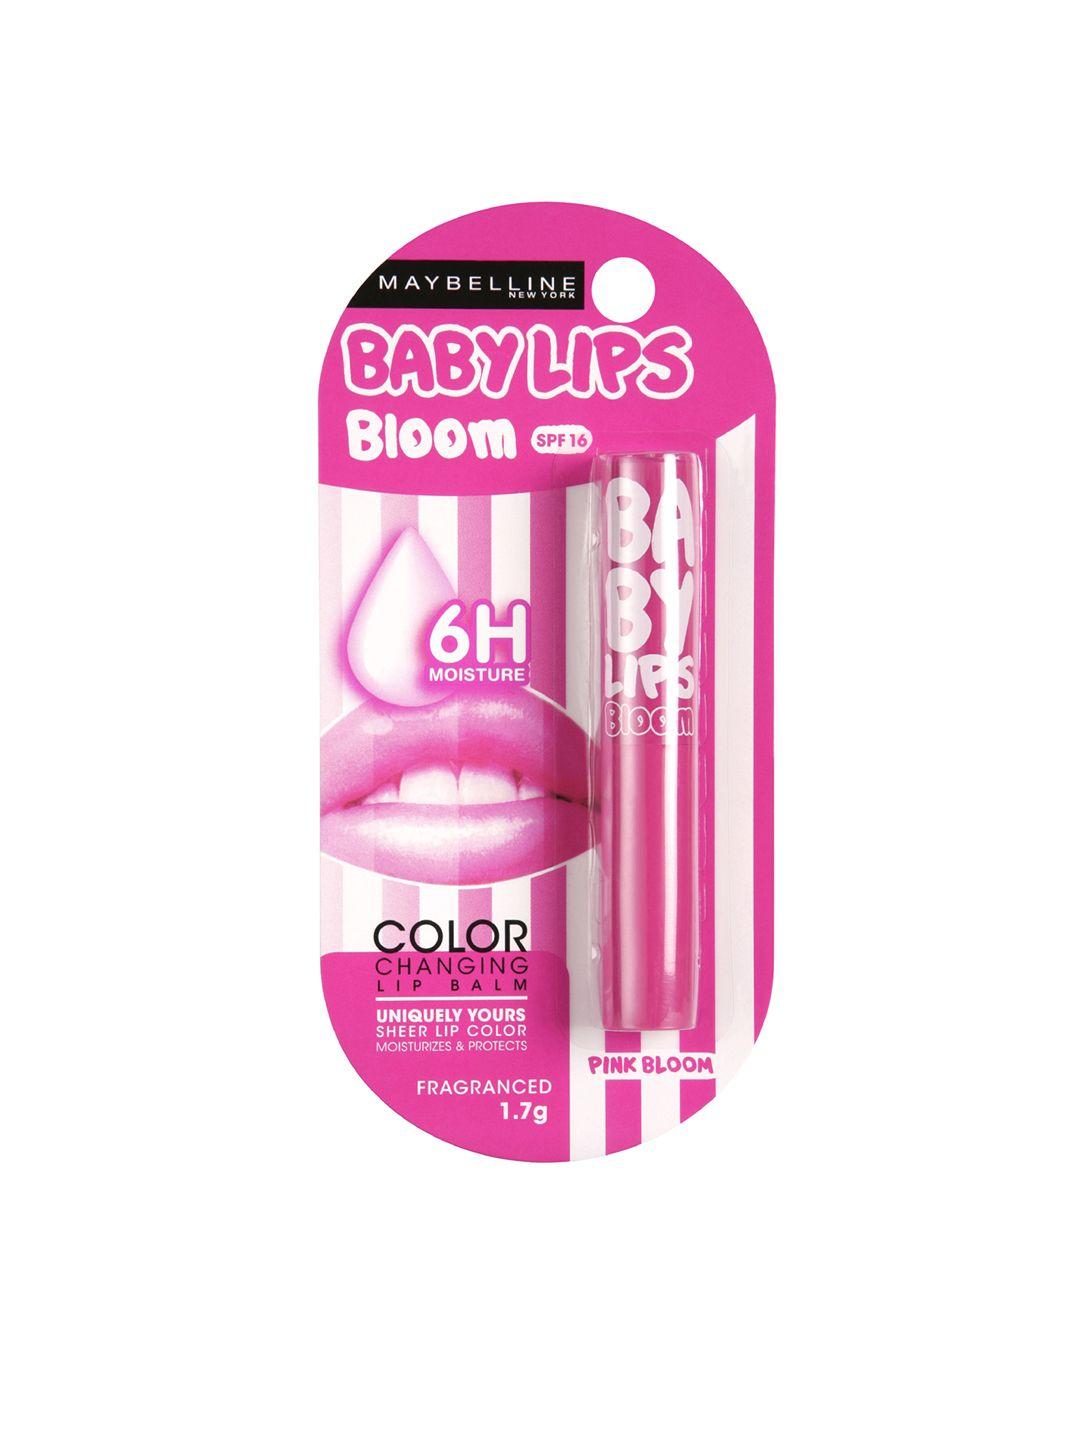 maybelline lip smooth color changing lip balm - pink bloom 1.7g